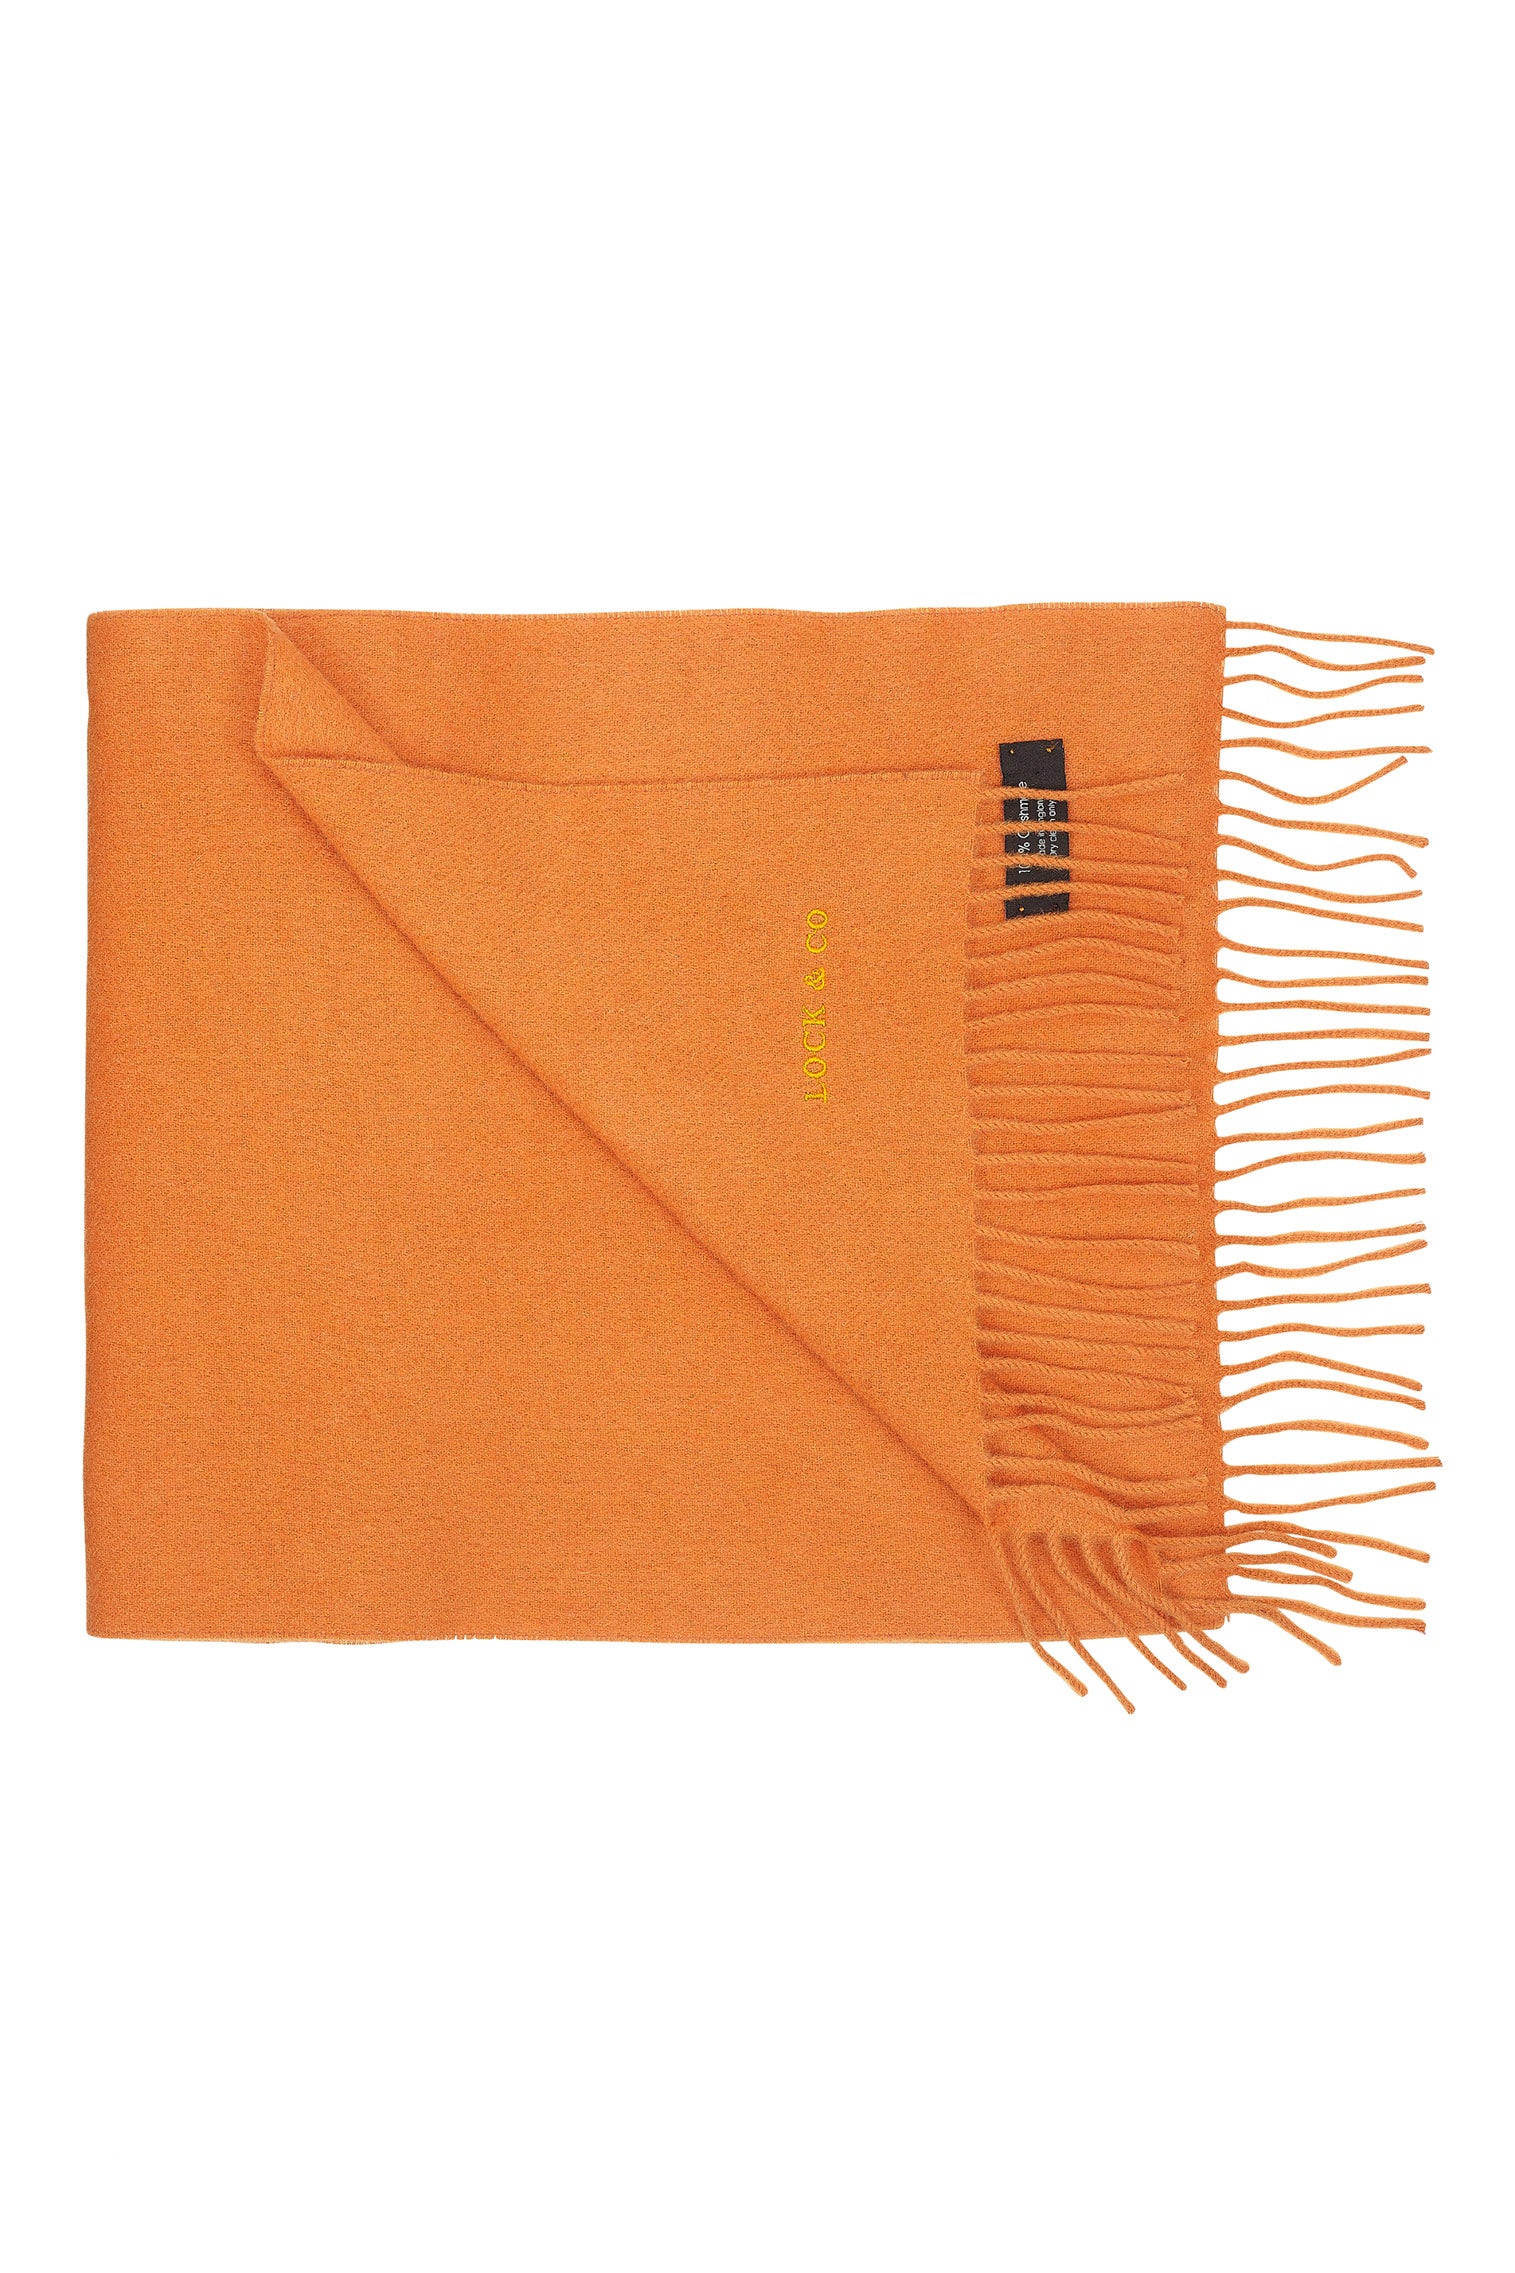 Cashmere Scarf - You May Also Like - Lock & Co. Hatters London UK